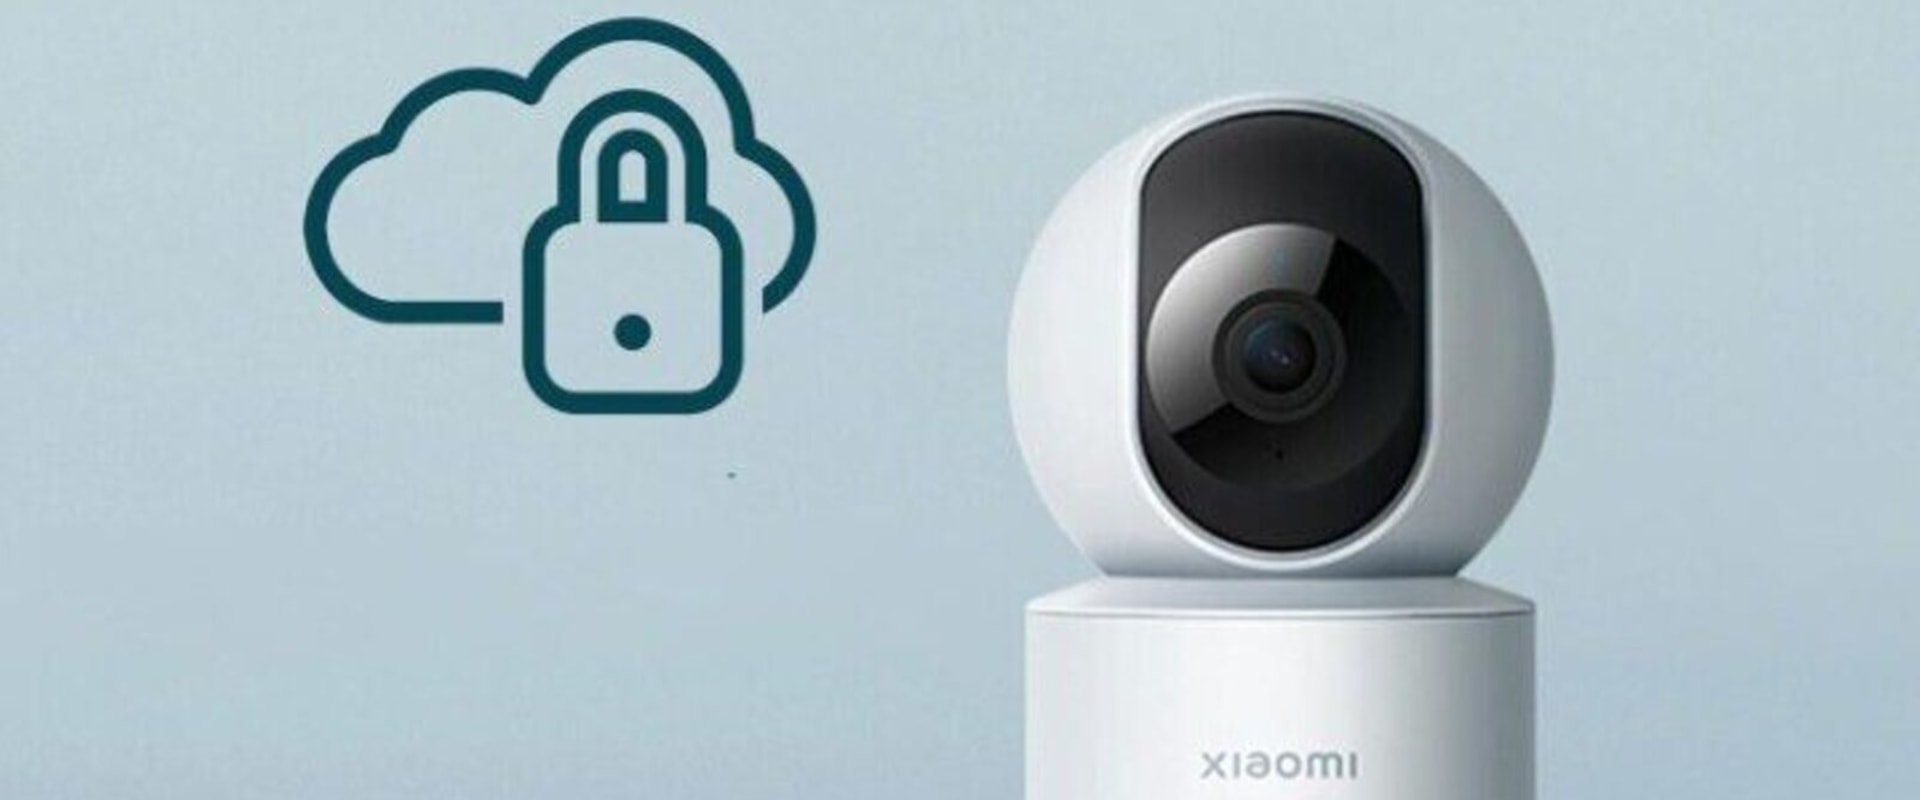 Wireless Cameras: The Complete Guide to Protecting Your Home or Business